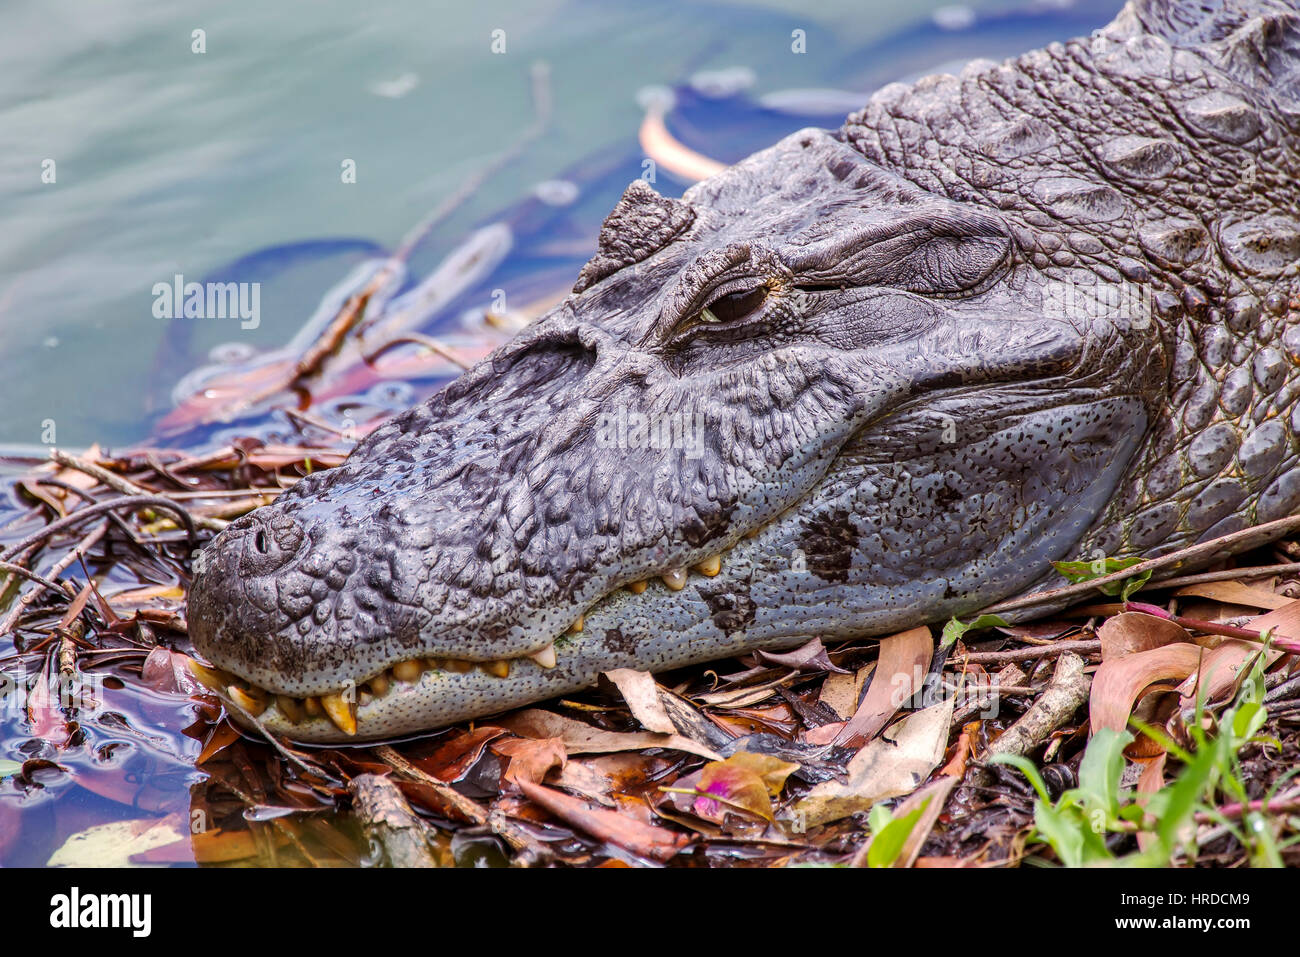 Old big Broad-snouted caiman (Caiman latirostris), photographed in Espírito Santo, Brazil. Atlântic forest biome. Stock Photo